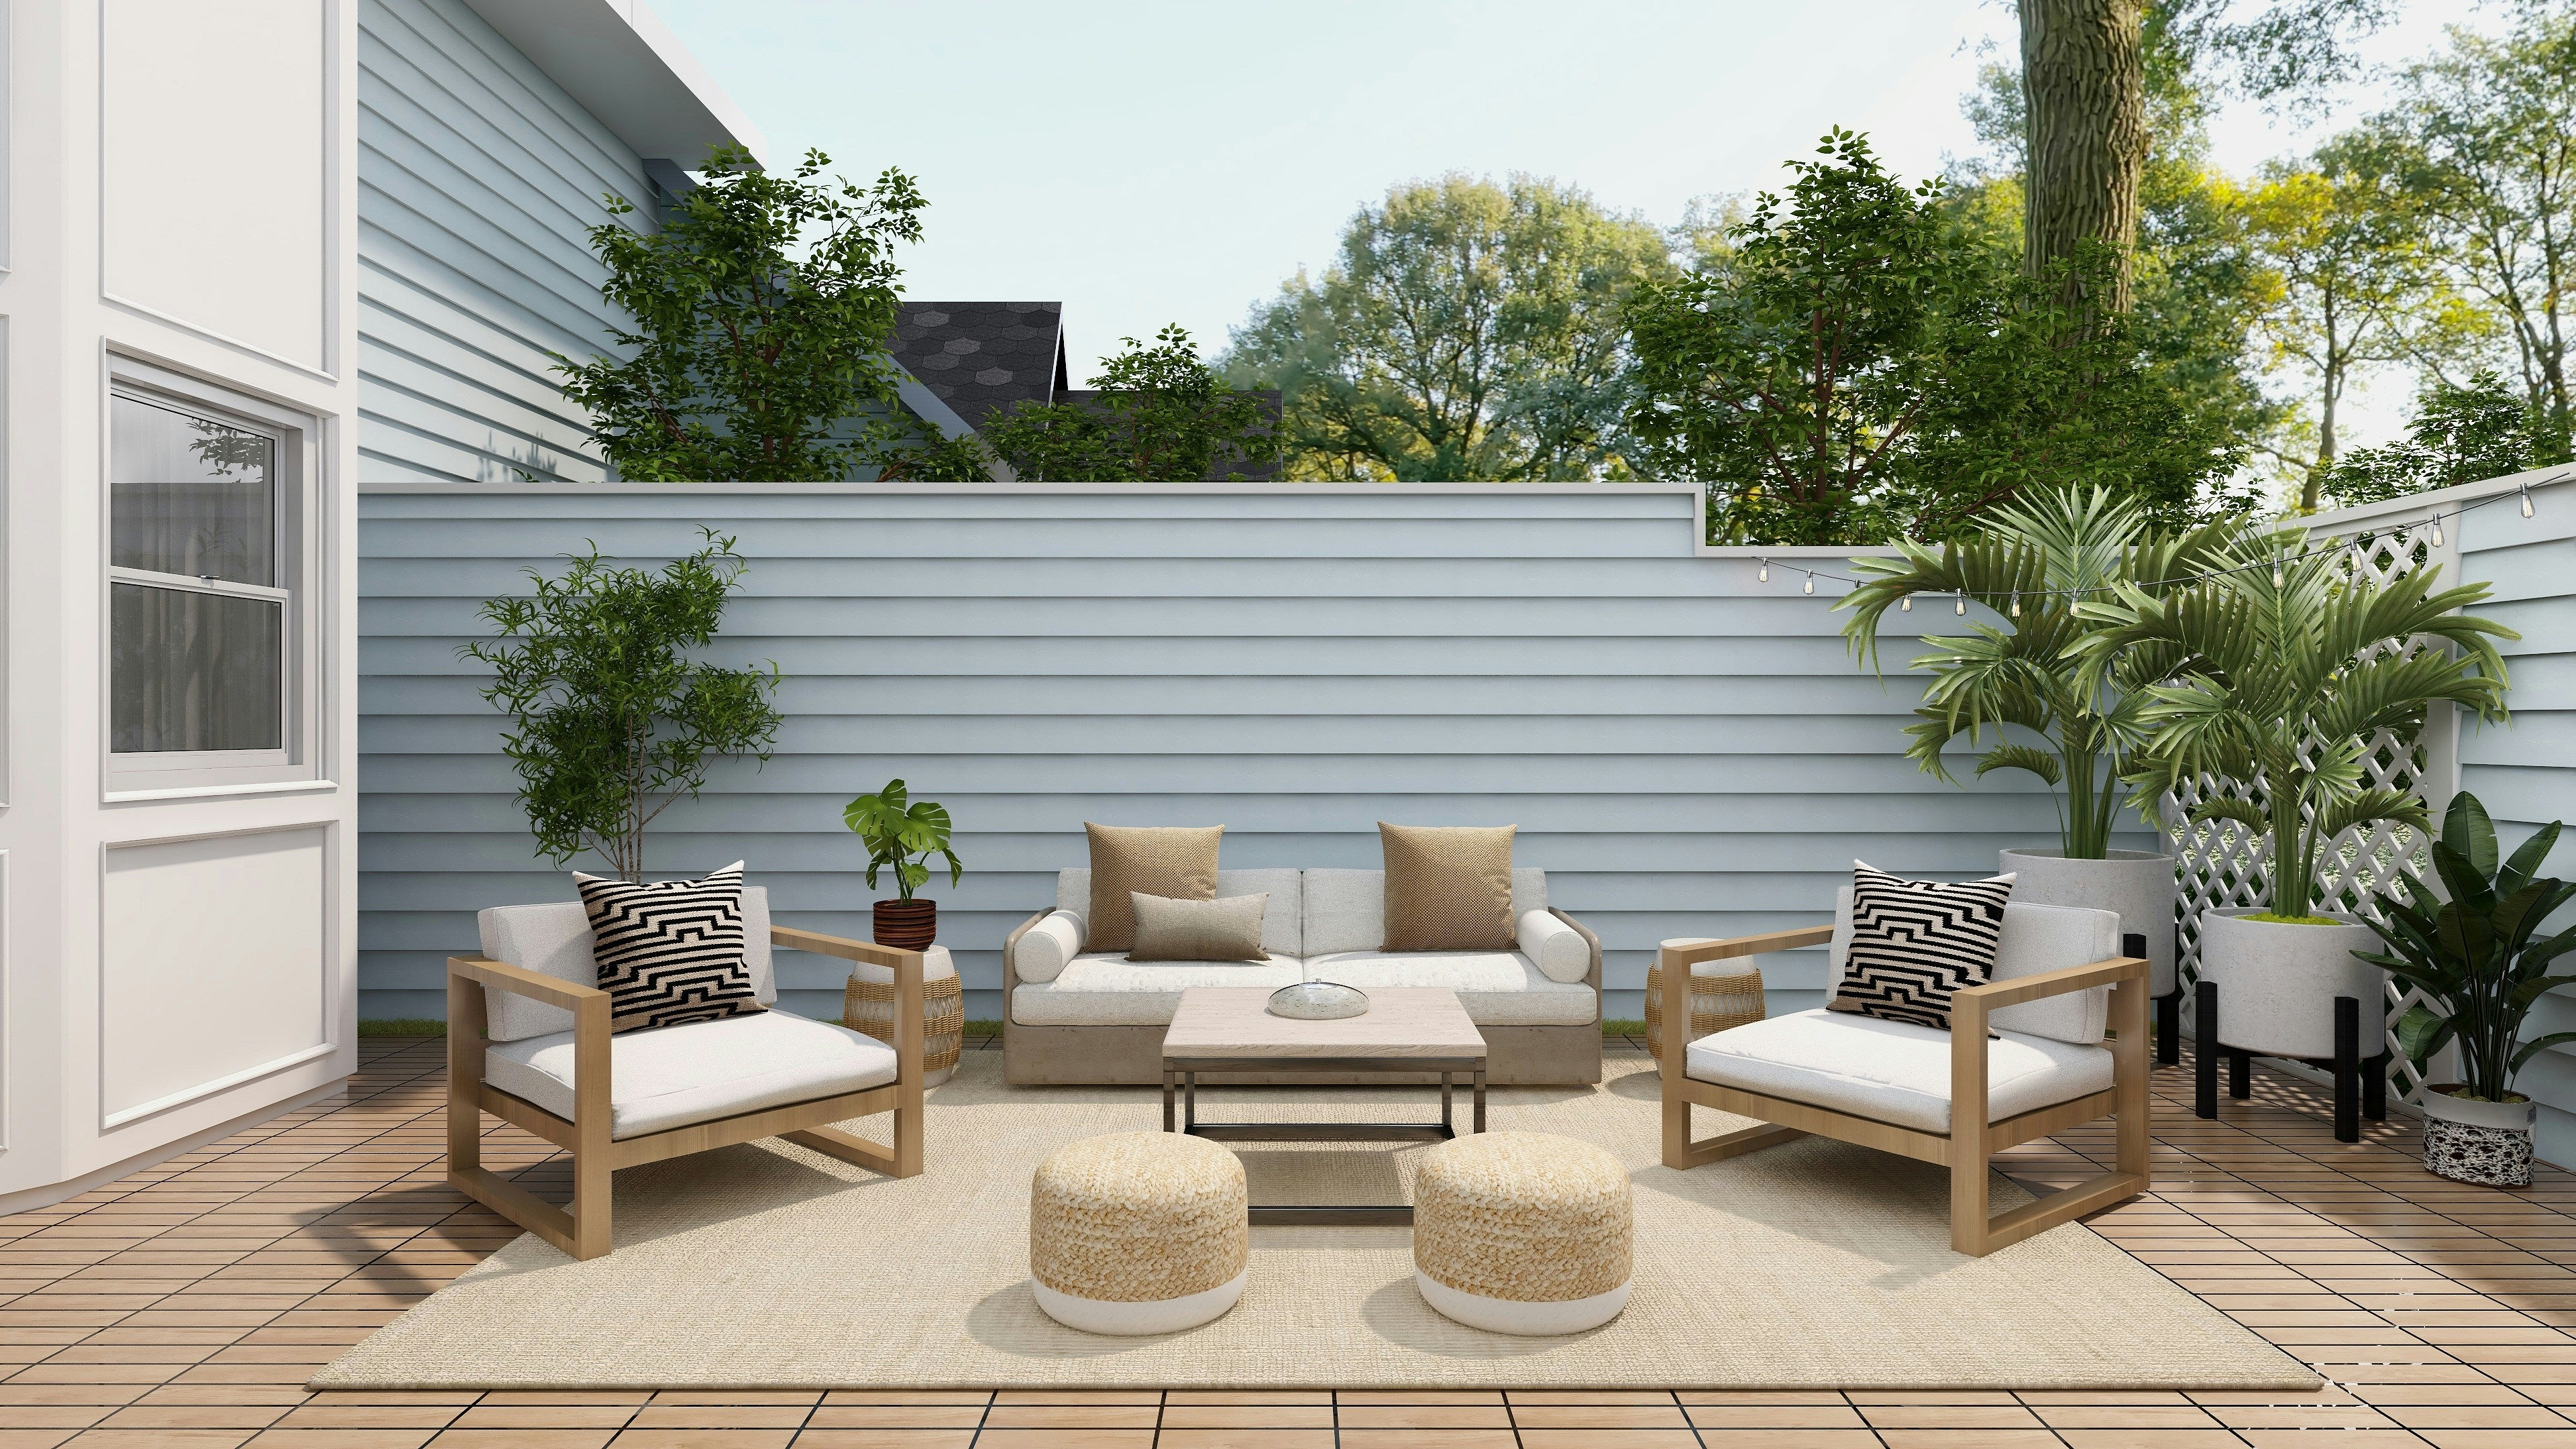 How to Choose the Perfect Patio Design for Your Home